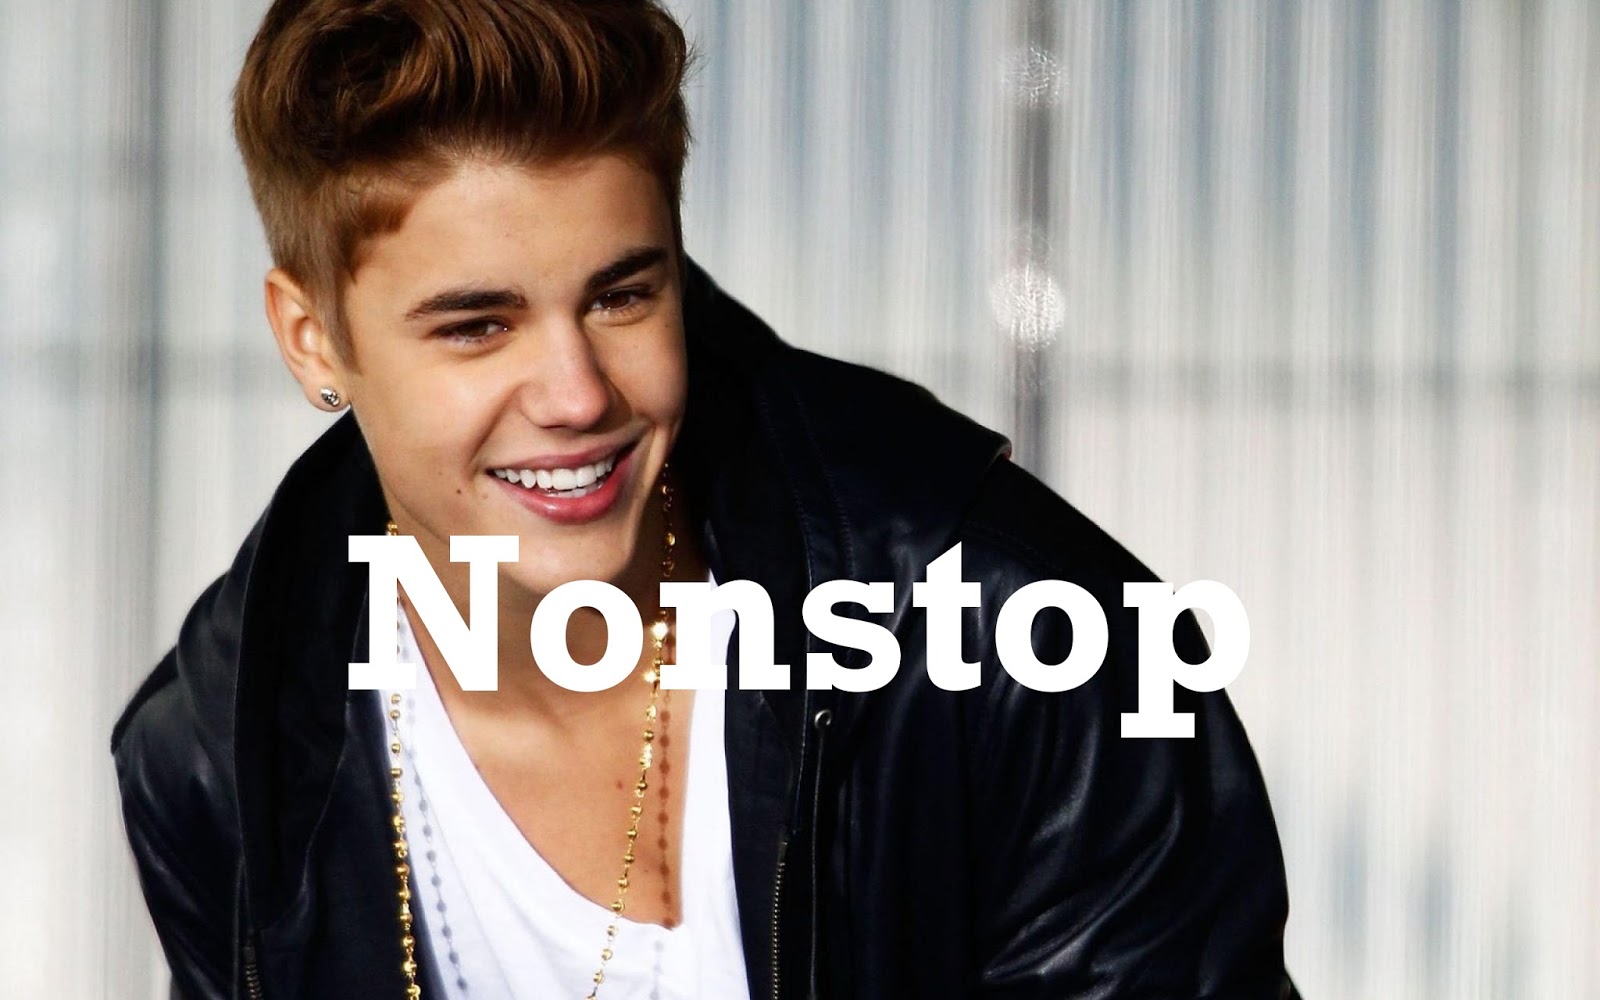 Free Direct Download Nonstop Mp3 Music: Justin Bieber Nonstop mp3 song1600 x 1000